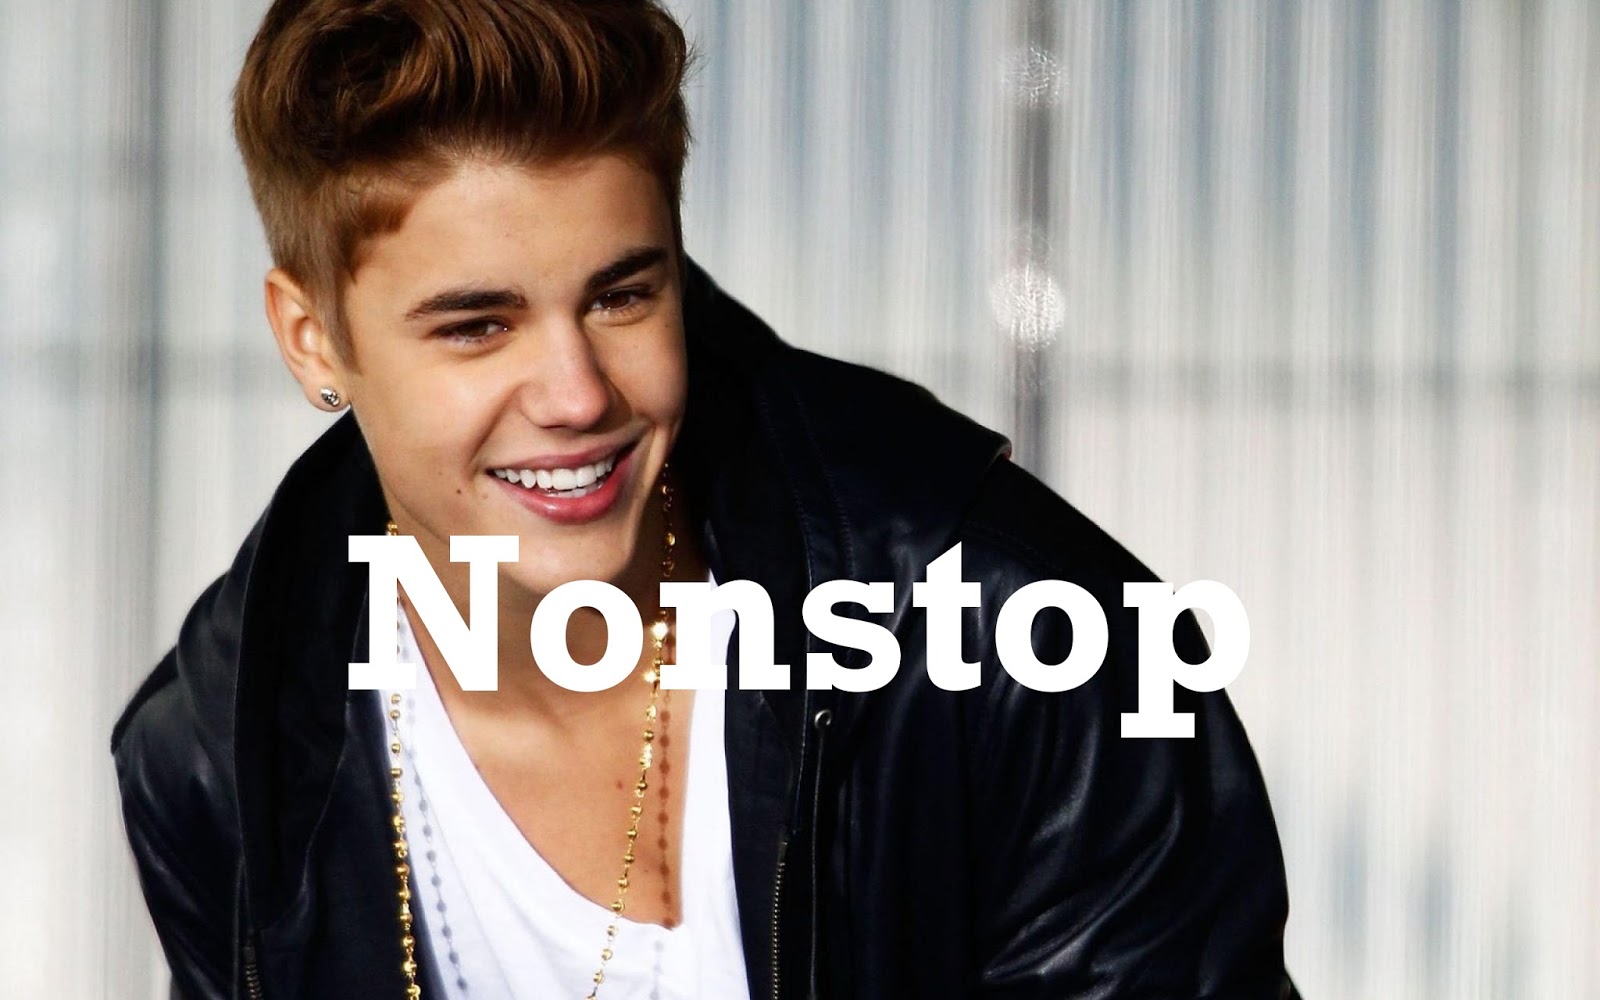 Free Direct Download Nonstop Mp3 Music: Justin Bieber Nonstop mp3 song1600 x 1000